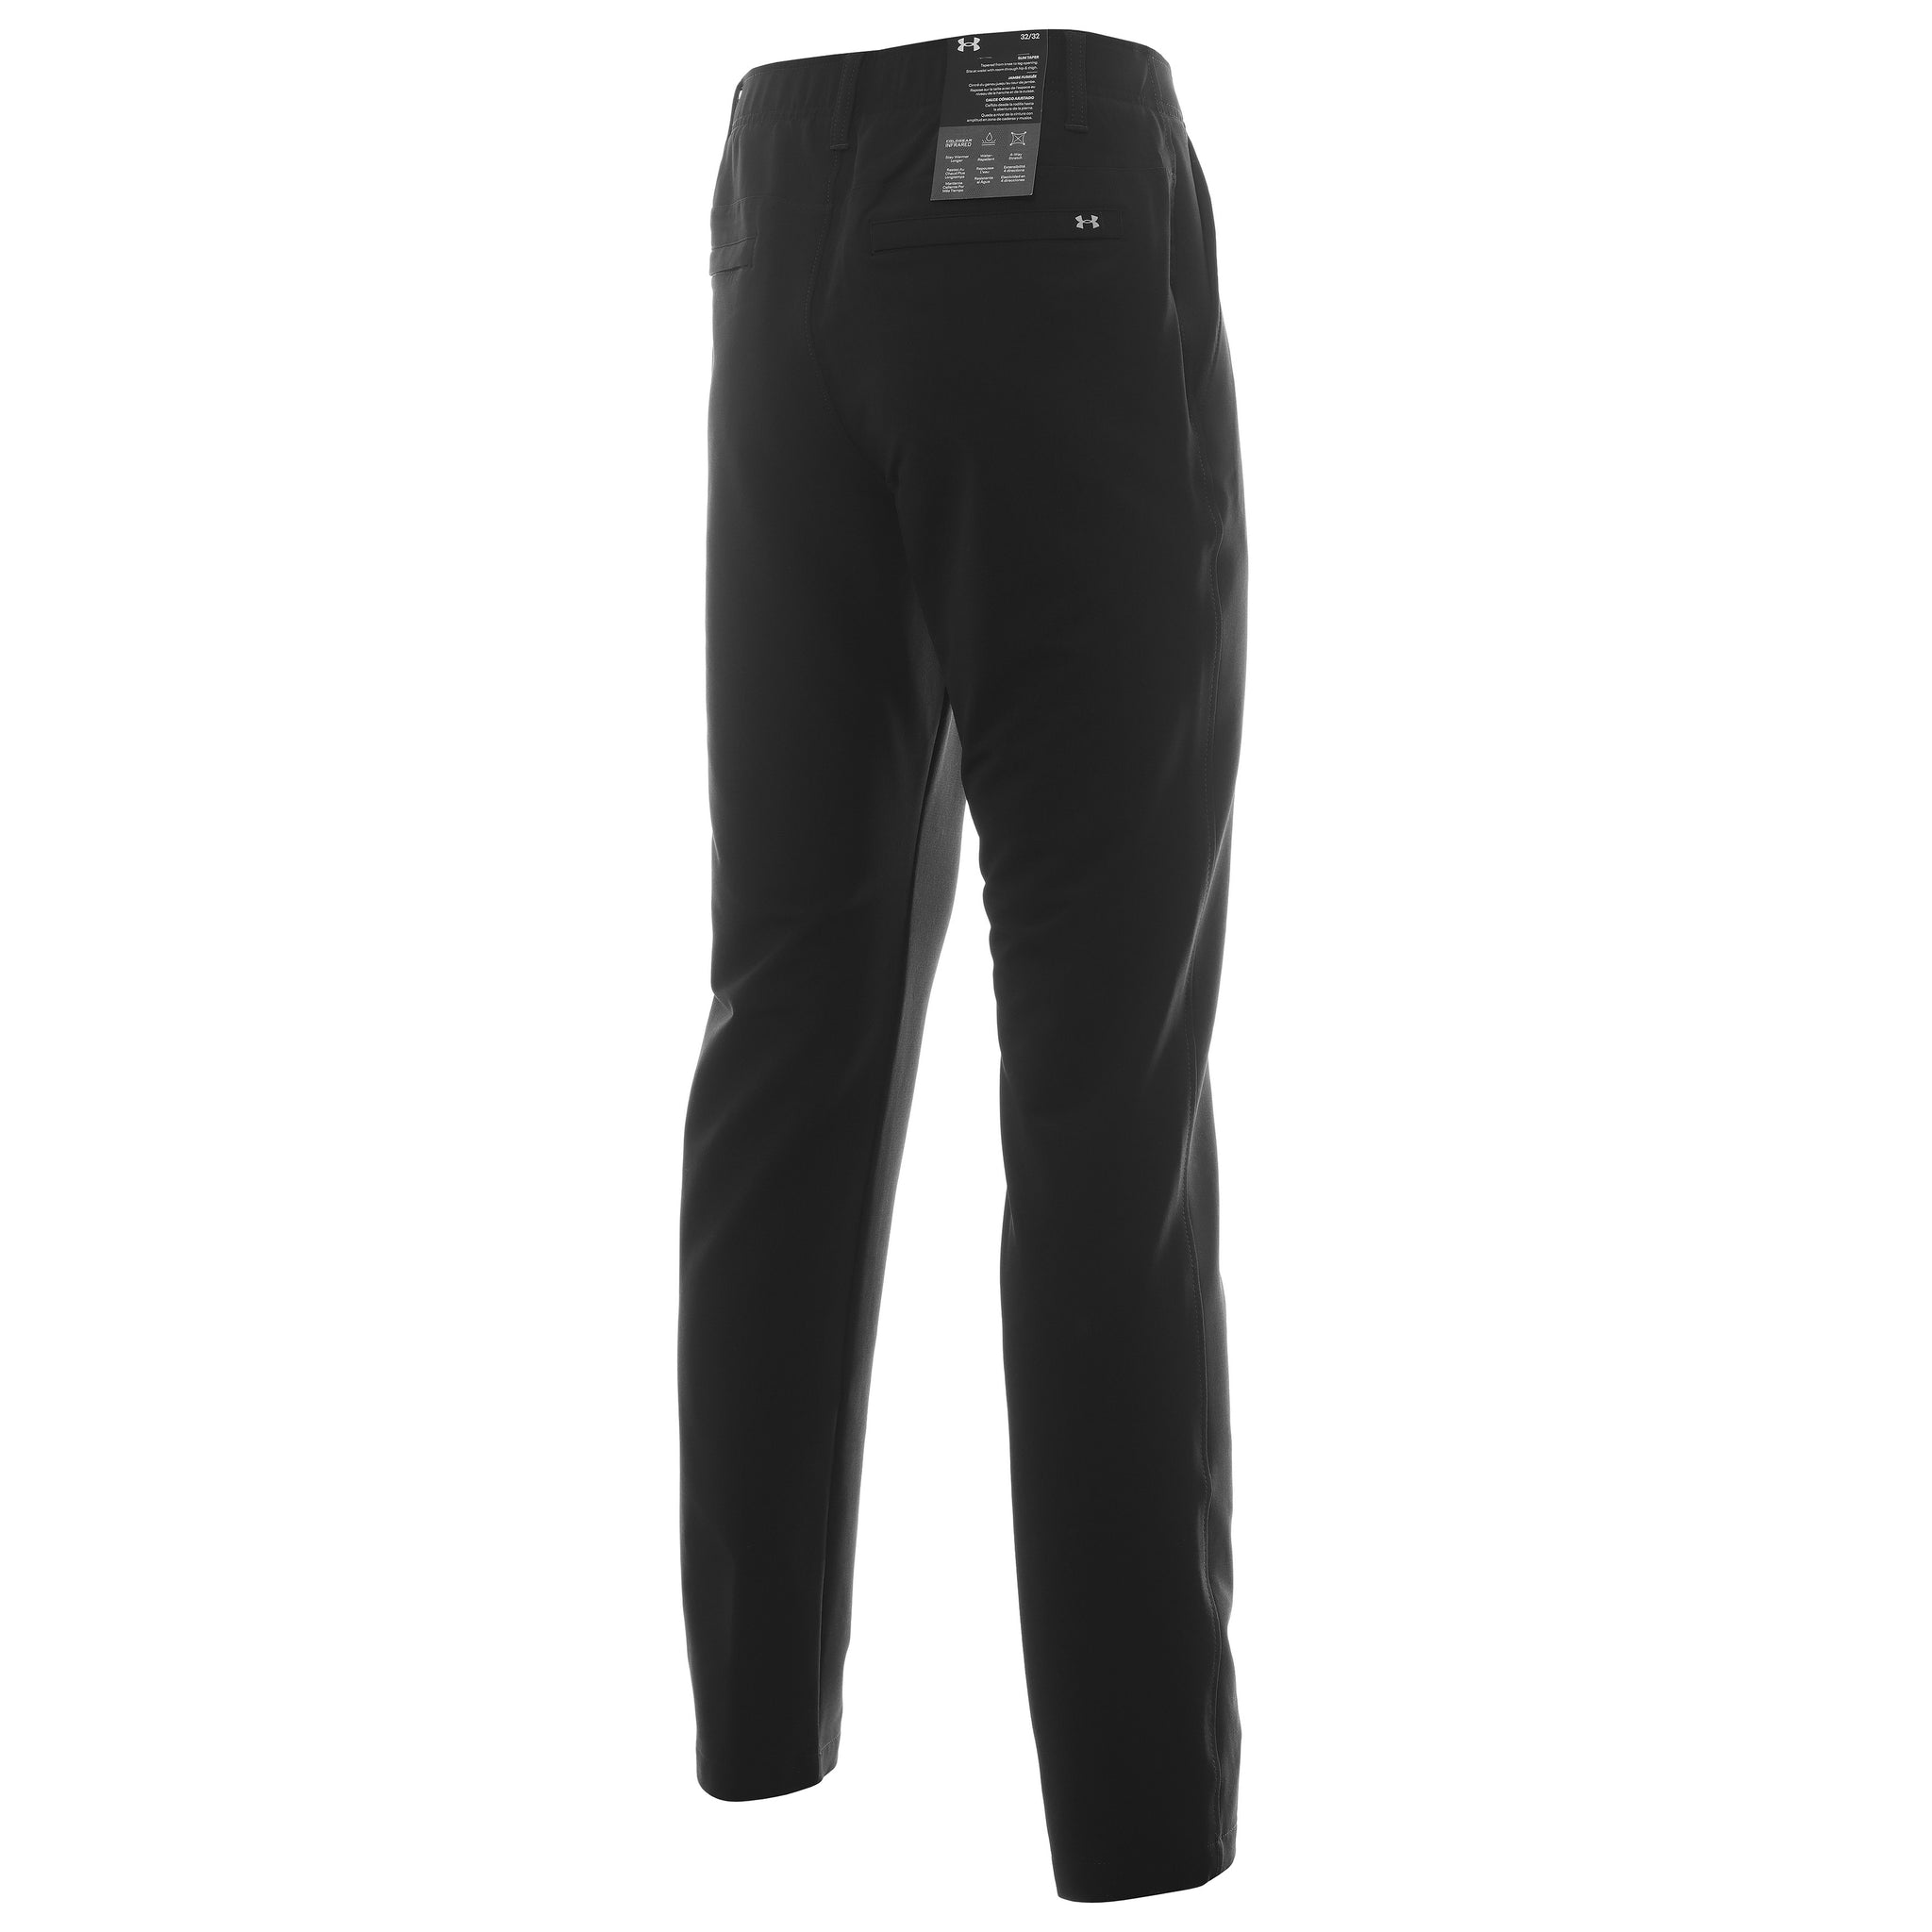 under-armour-golf-cgi-tapered-pants-1379729-black-001